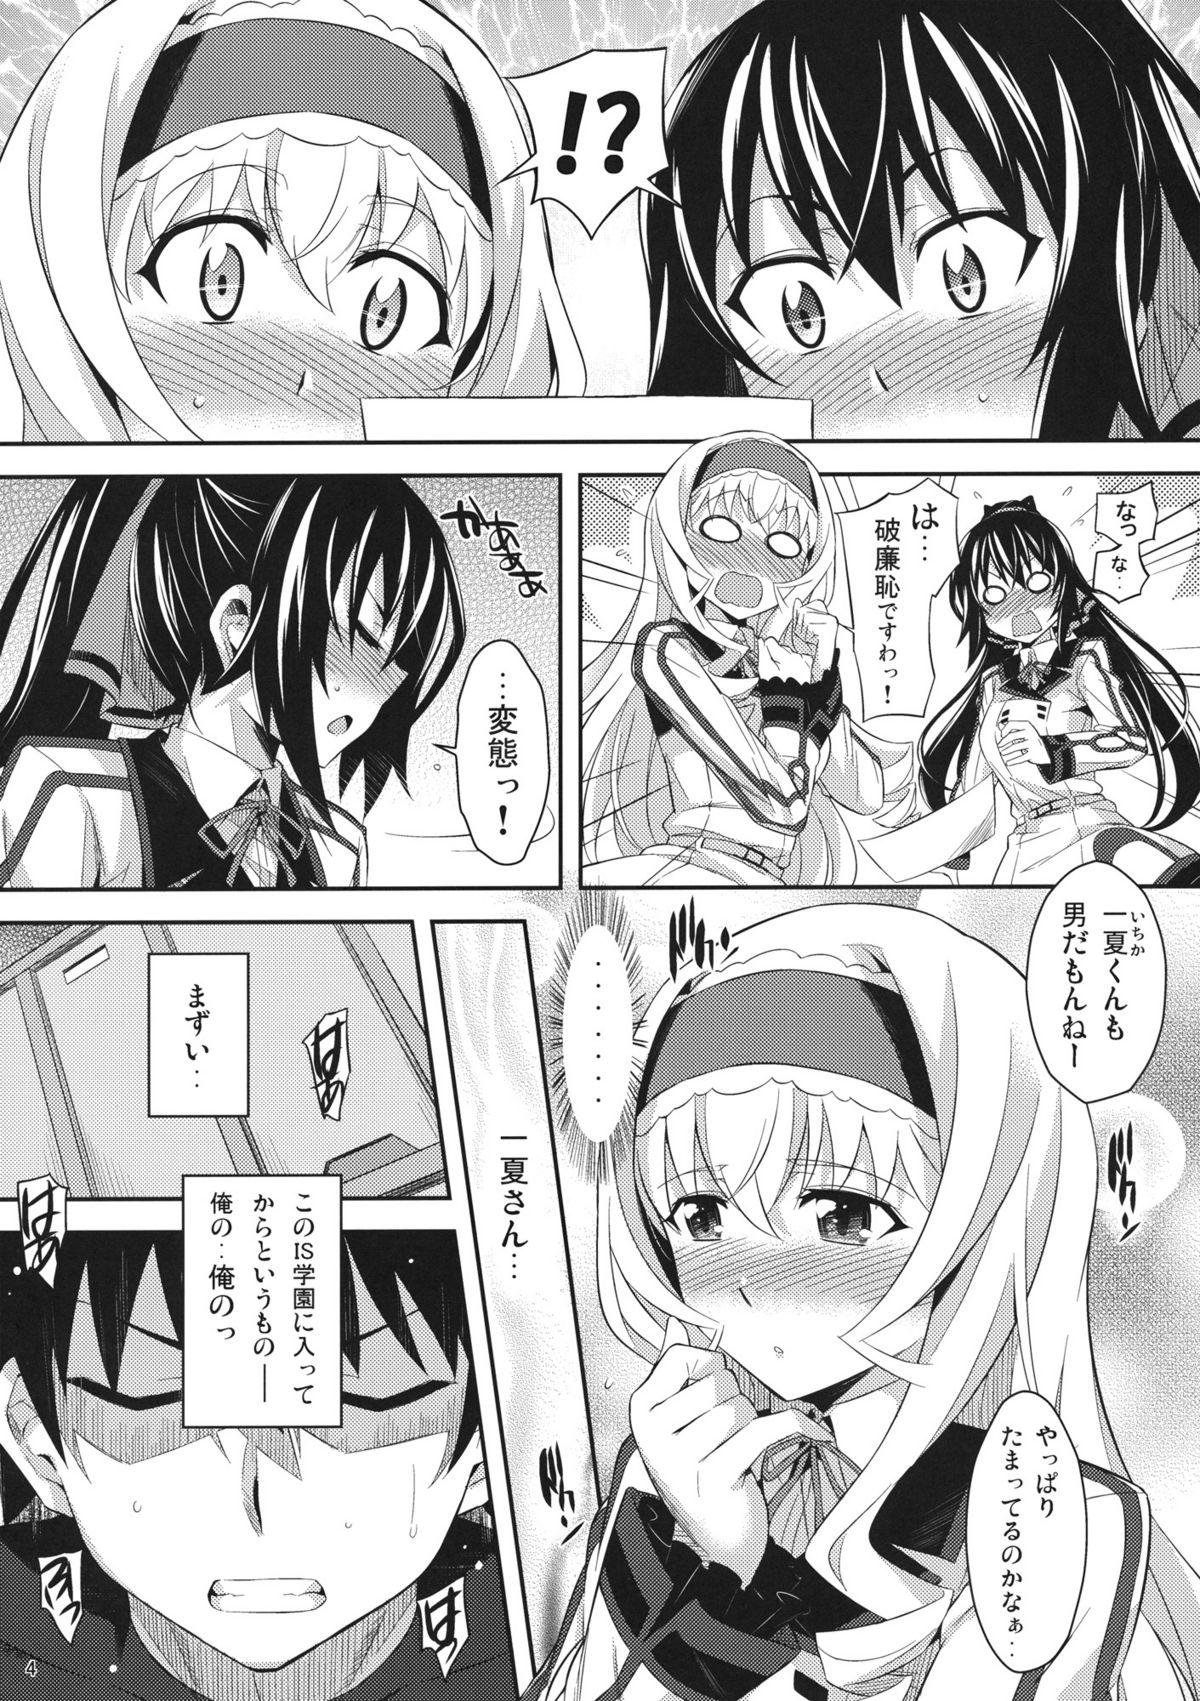 Rola Into Shower - Infinite stratos Asians - Page 3